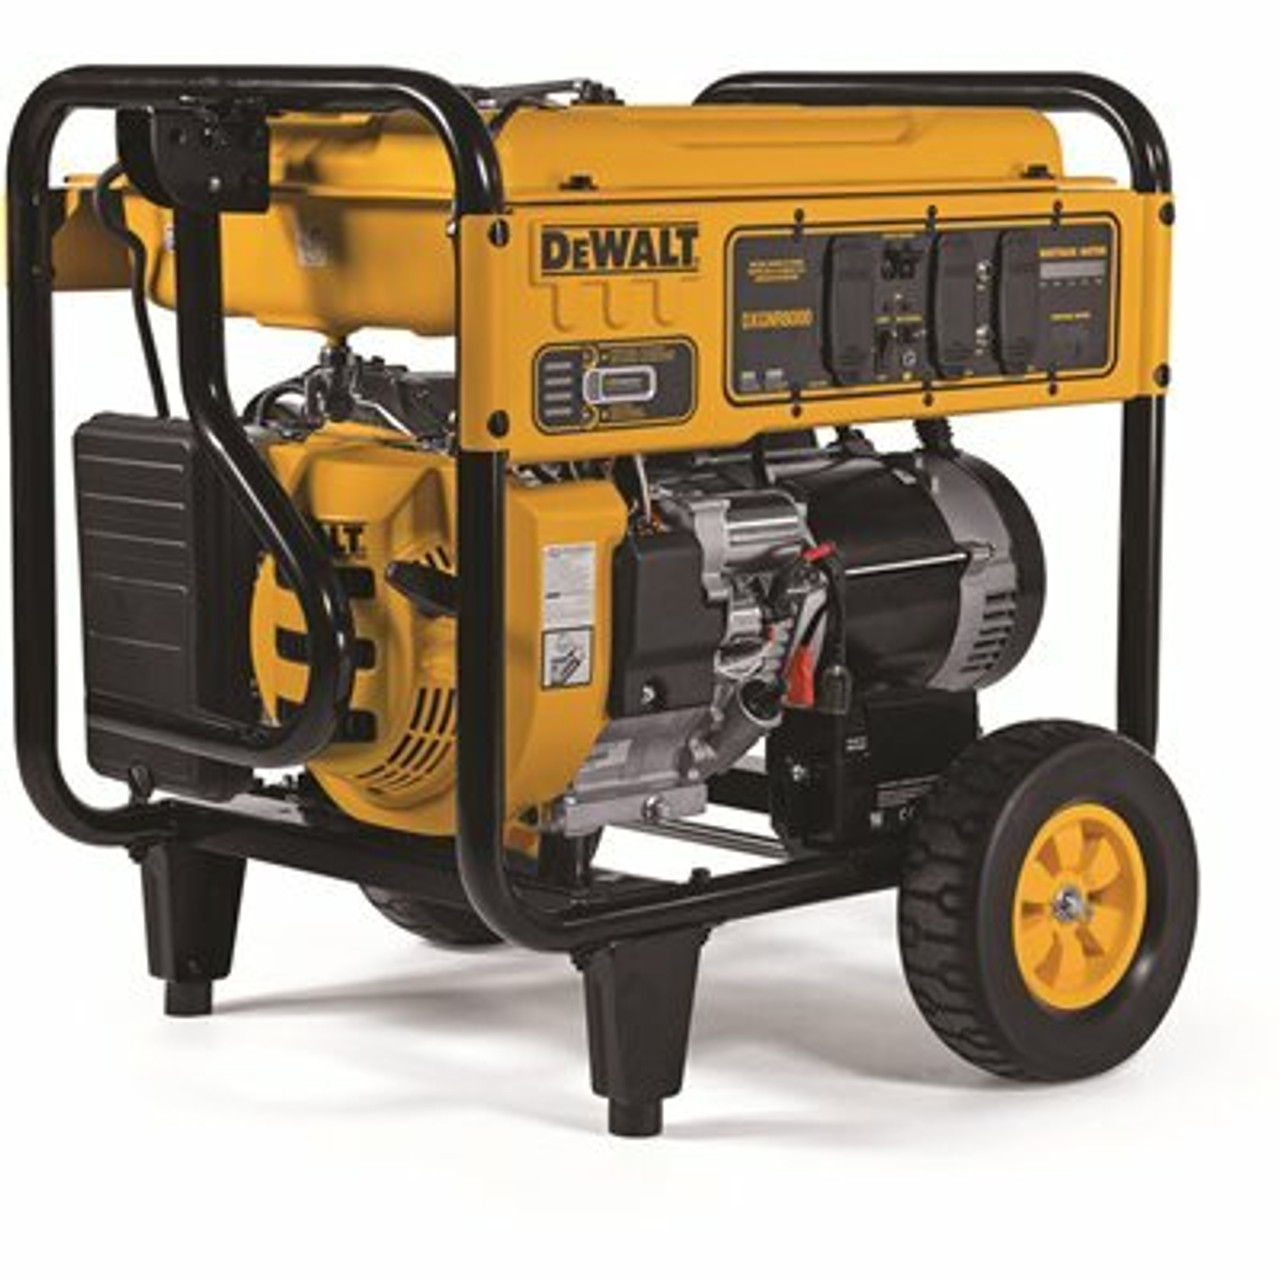 Dewalt 8000-Watt Electric Start Gas-Powered Portable Generator With Idle Control, Gfci Outlets And Co Protect